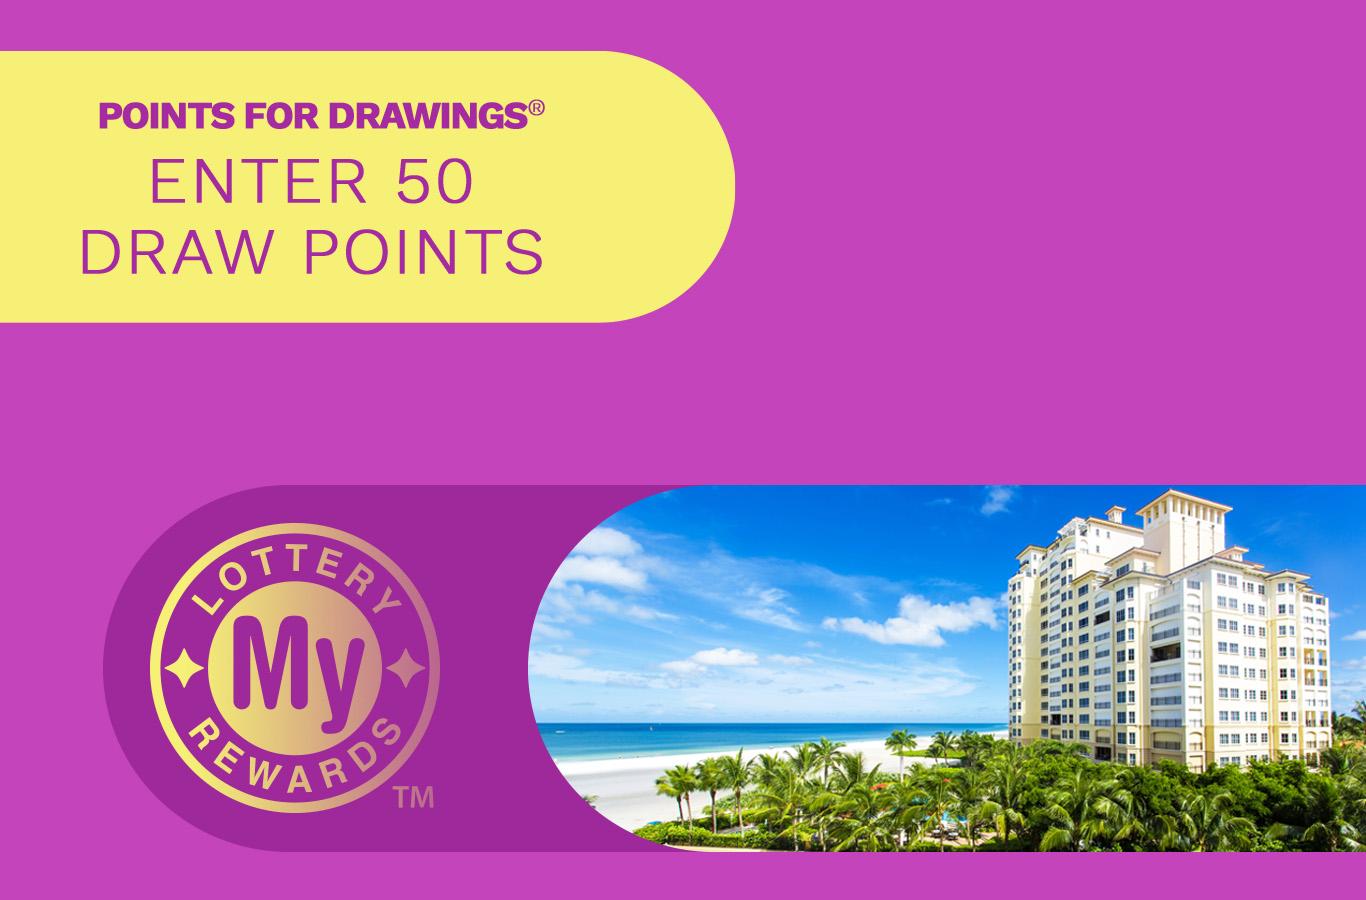 Here's your chance to win a Marco Island Beach Resort Vacation! Enter by Tuesday, July 2nd.